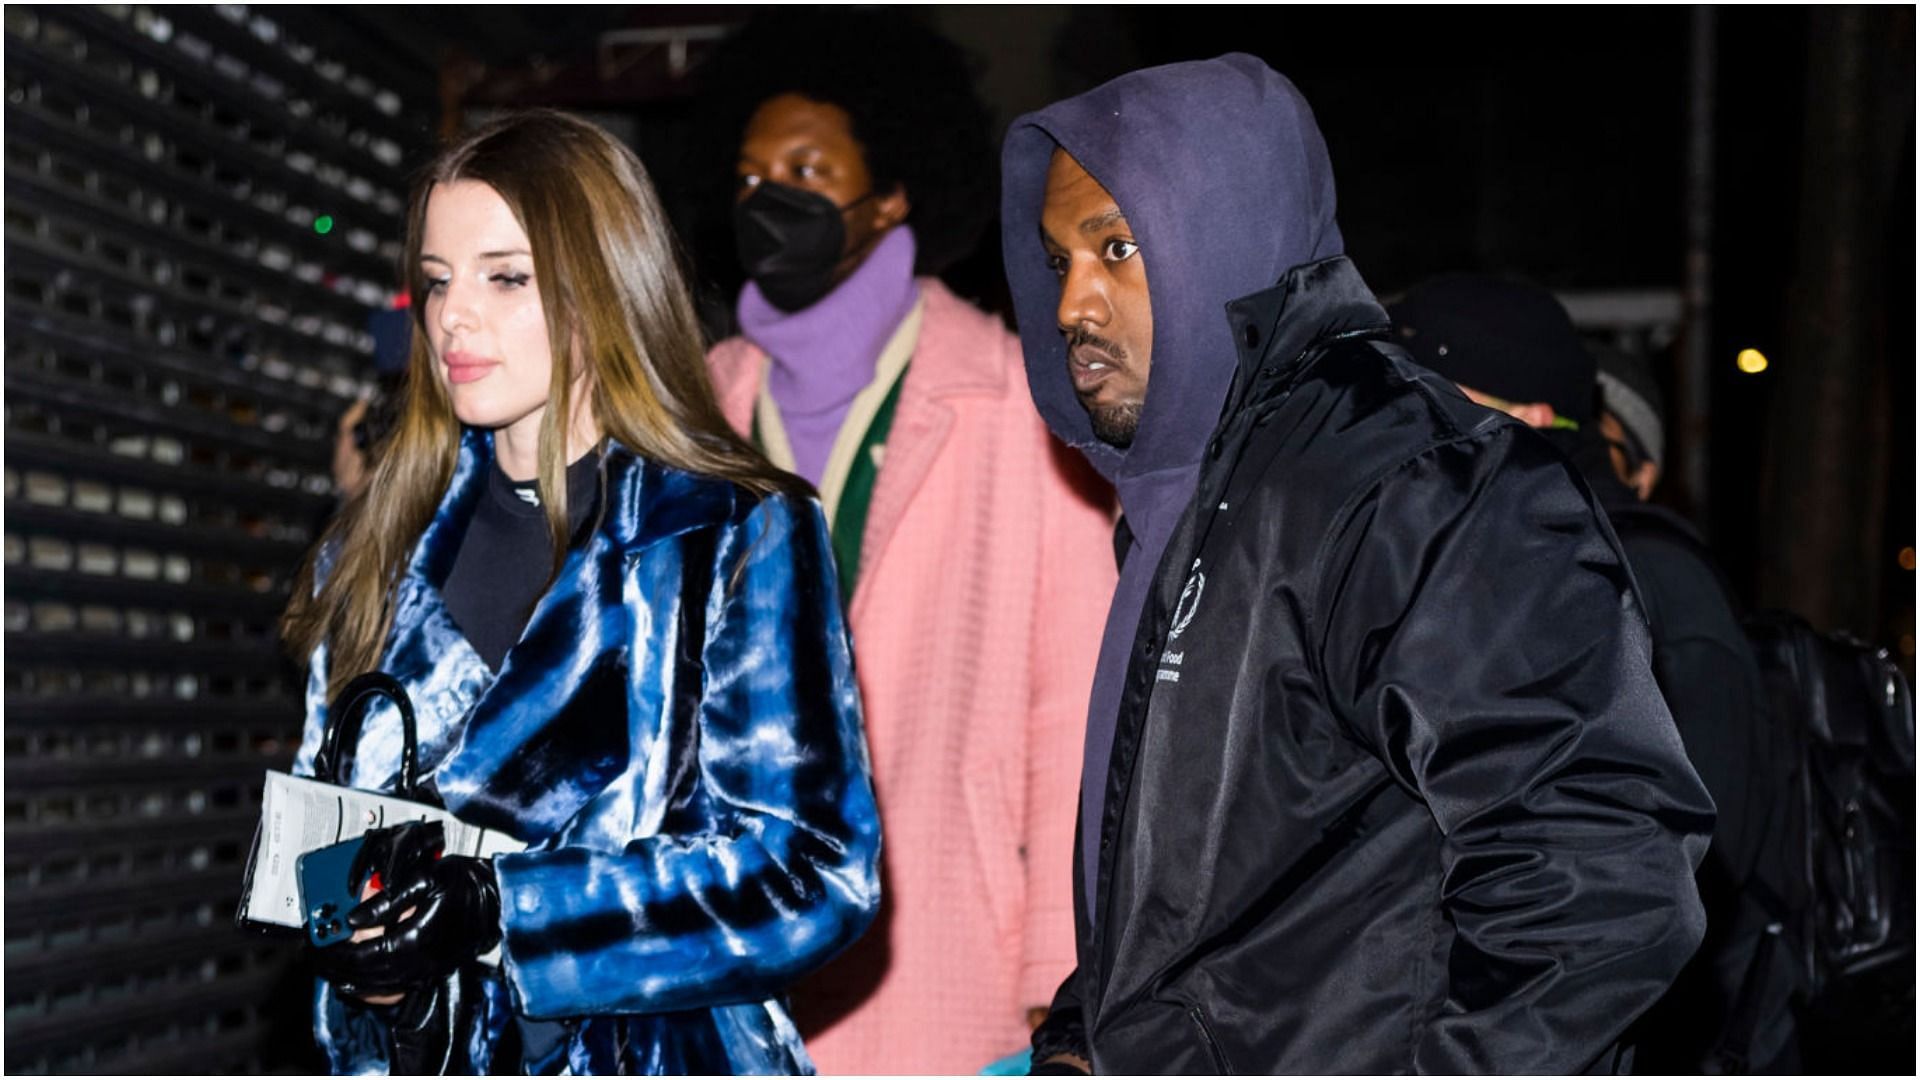 Julia Fox and Kanye West are seen in Greenwich Village on January 04, 2022, in New York City (Image via Gotham/Getty Images)